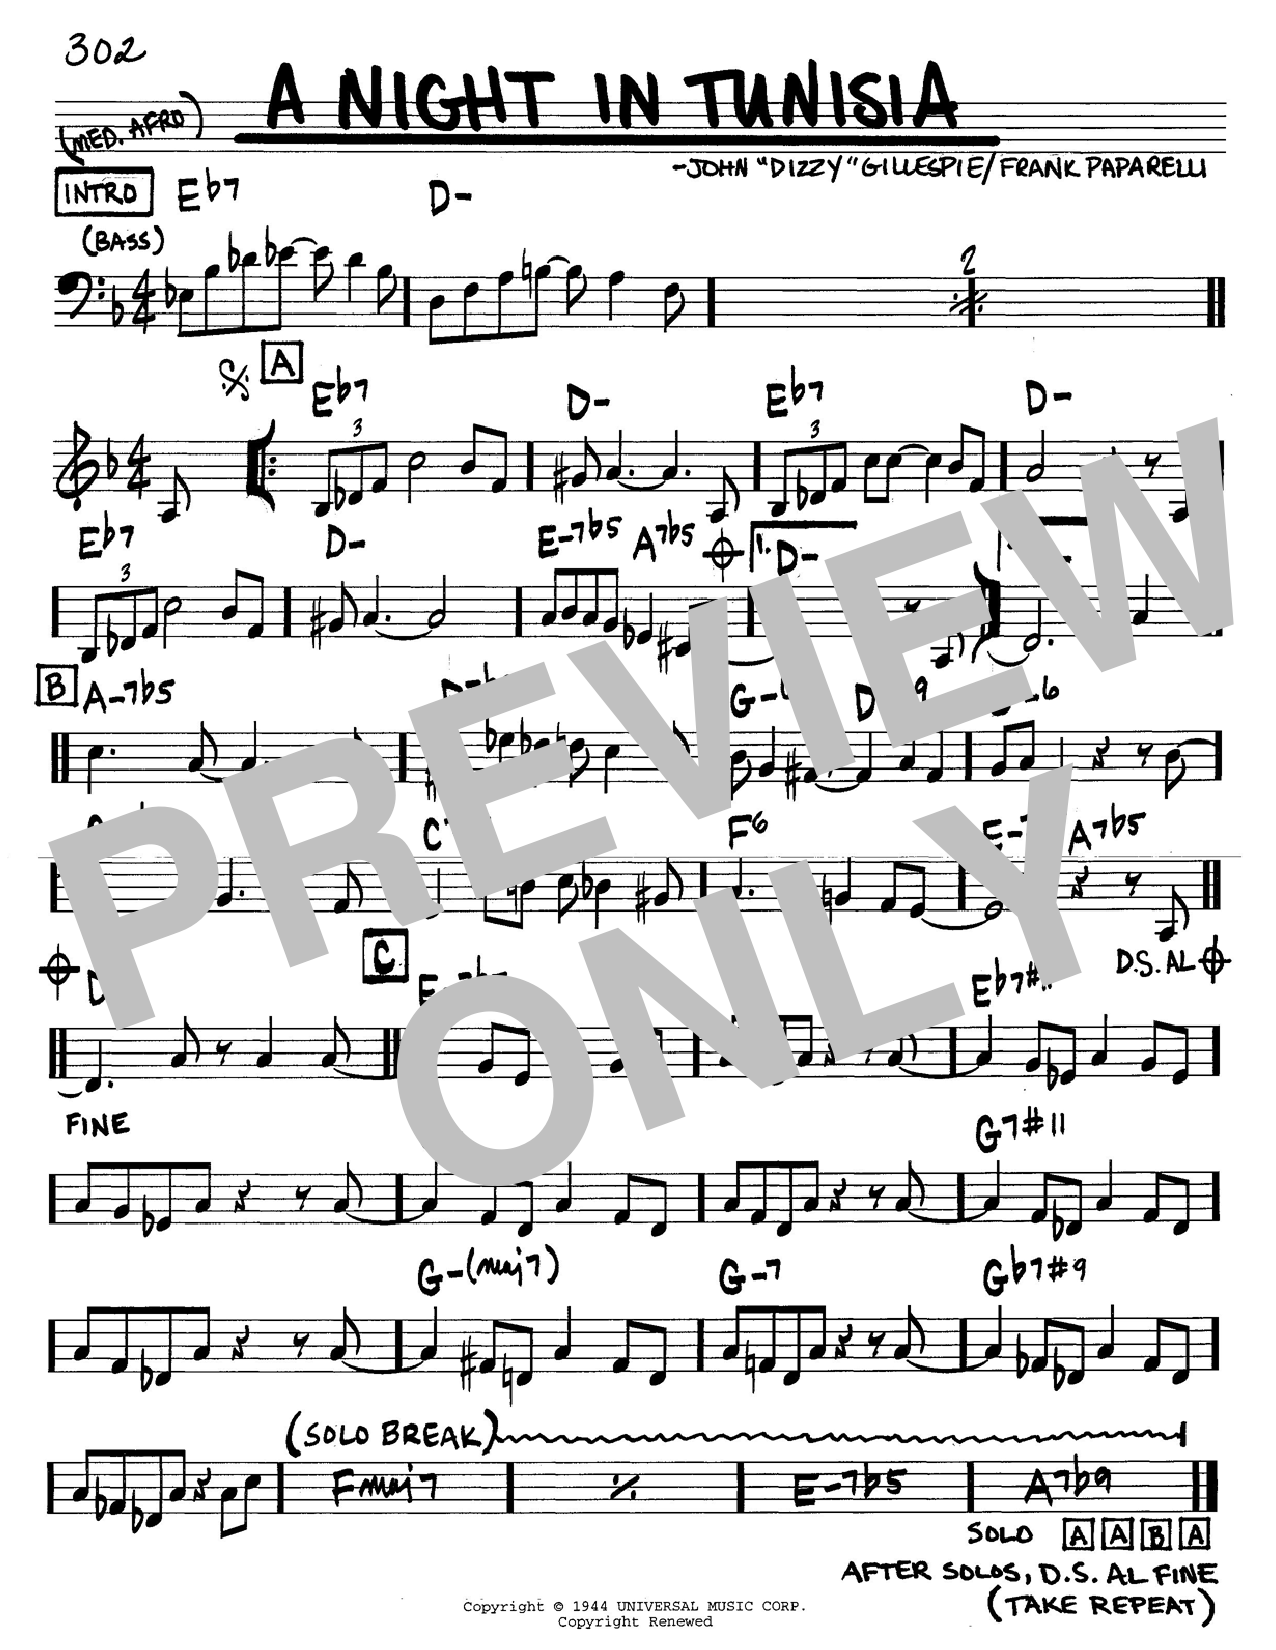 Dizzy Gillespie A Night In Tunisia sheet music notes and chords. Download Printable PDF.